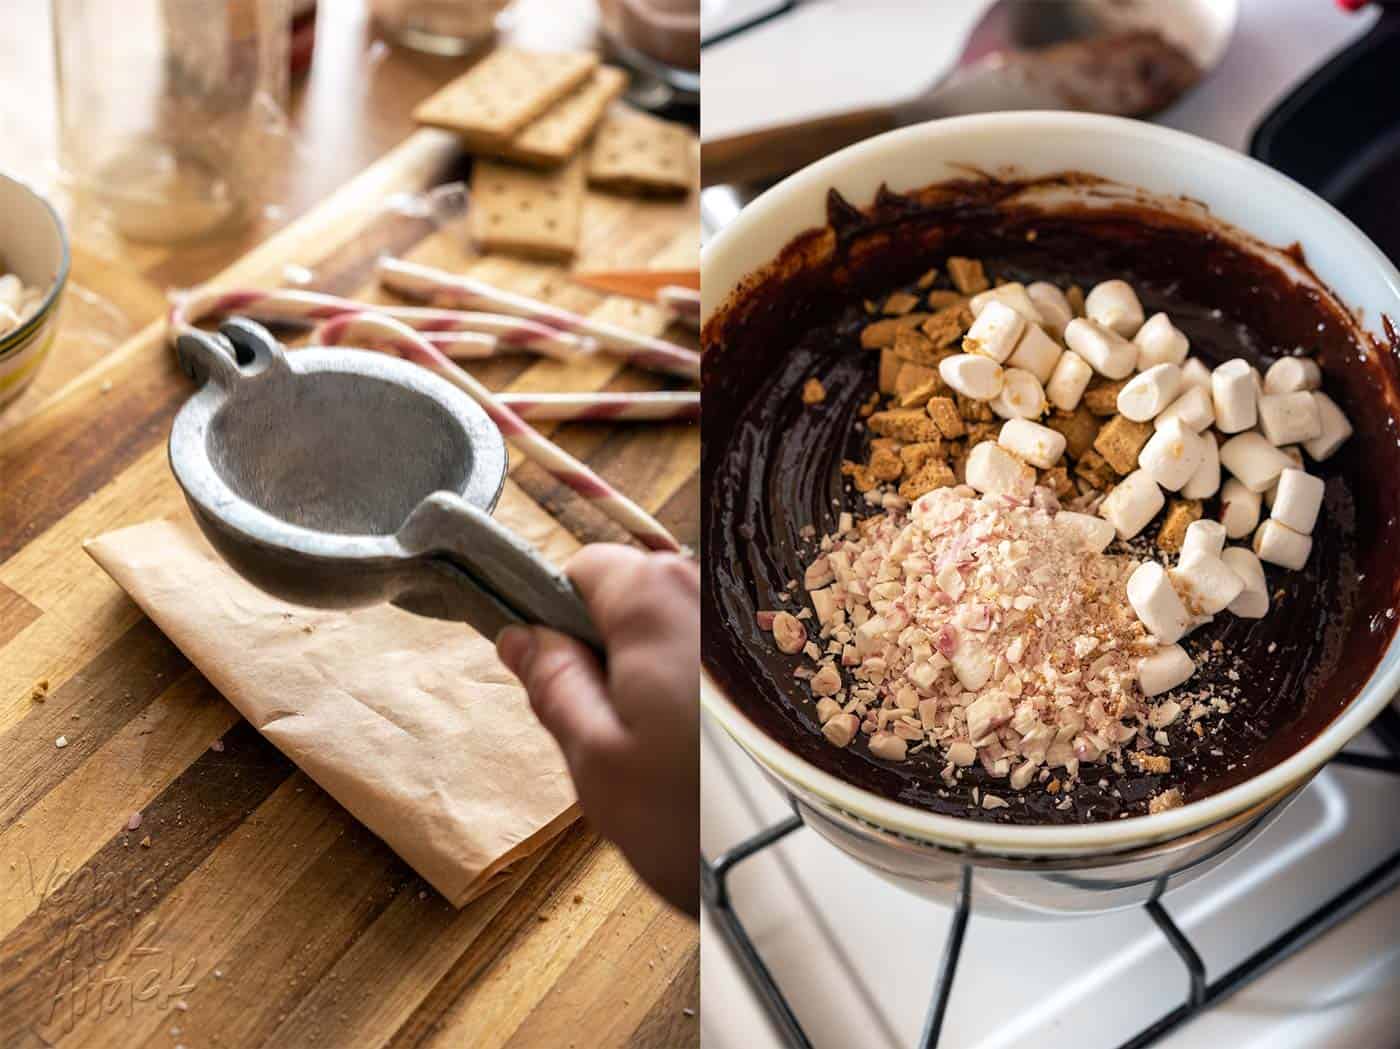 Left image: hitting a paper bag filled with candy cane to crush the pieces. Right image: Mix-ins being added to fudge base